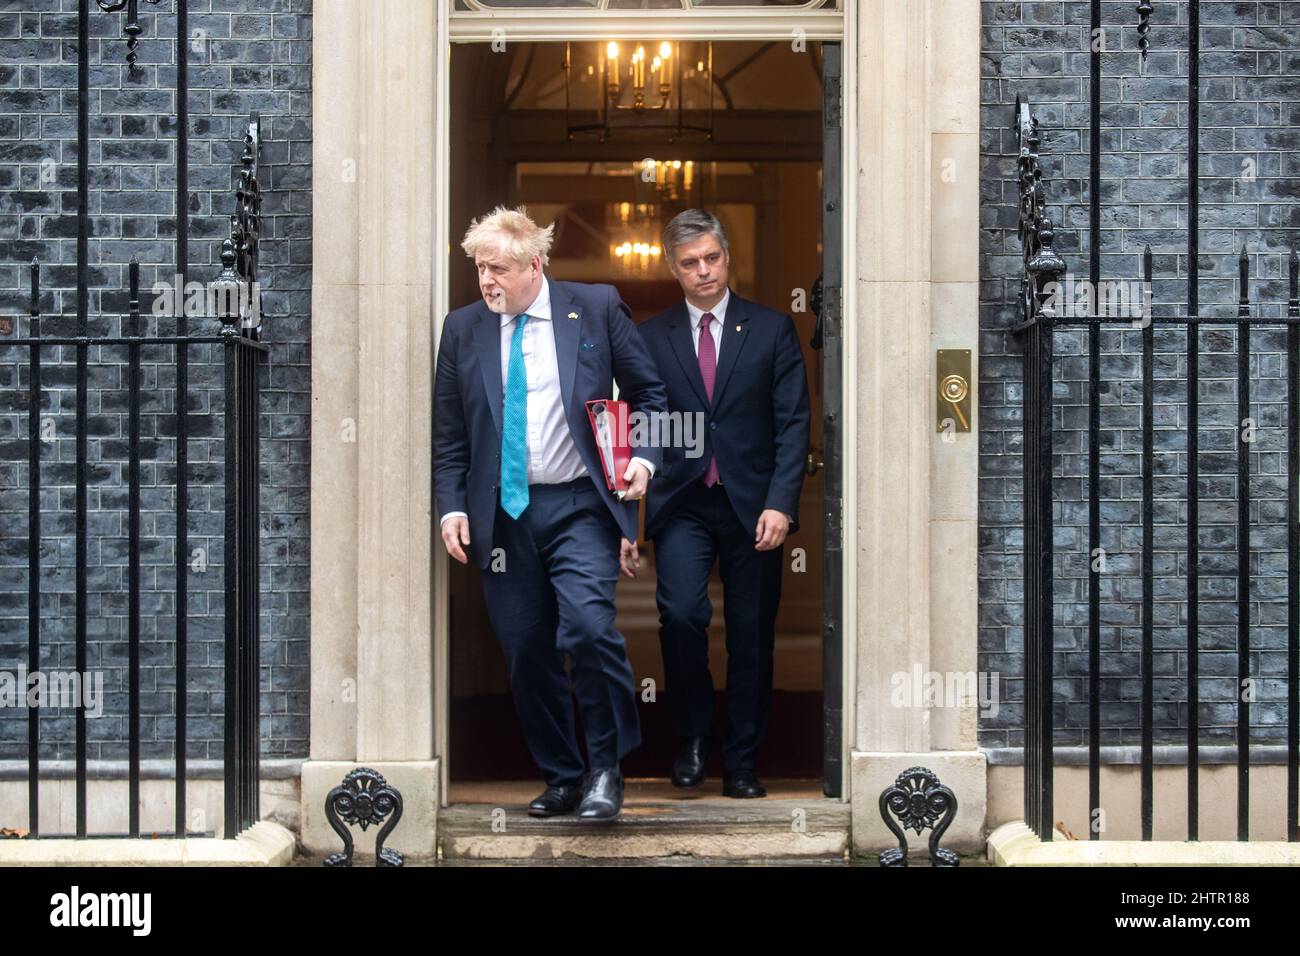 LONDON, MARCH 02 2022, Prime Minister Boris Johnson and Ukrainian ambassador Vadym Prystaiko leave 10 Downing Street for PMQs at the House of Commons. Credit: Lucy North/Alamy Live News Stock Photo